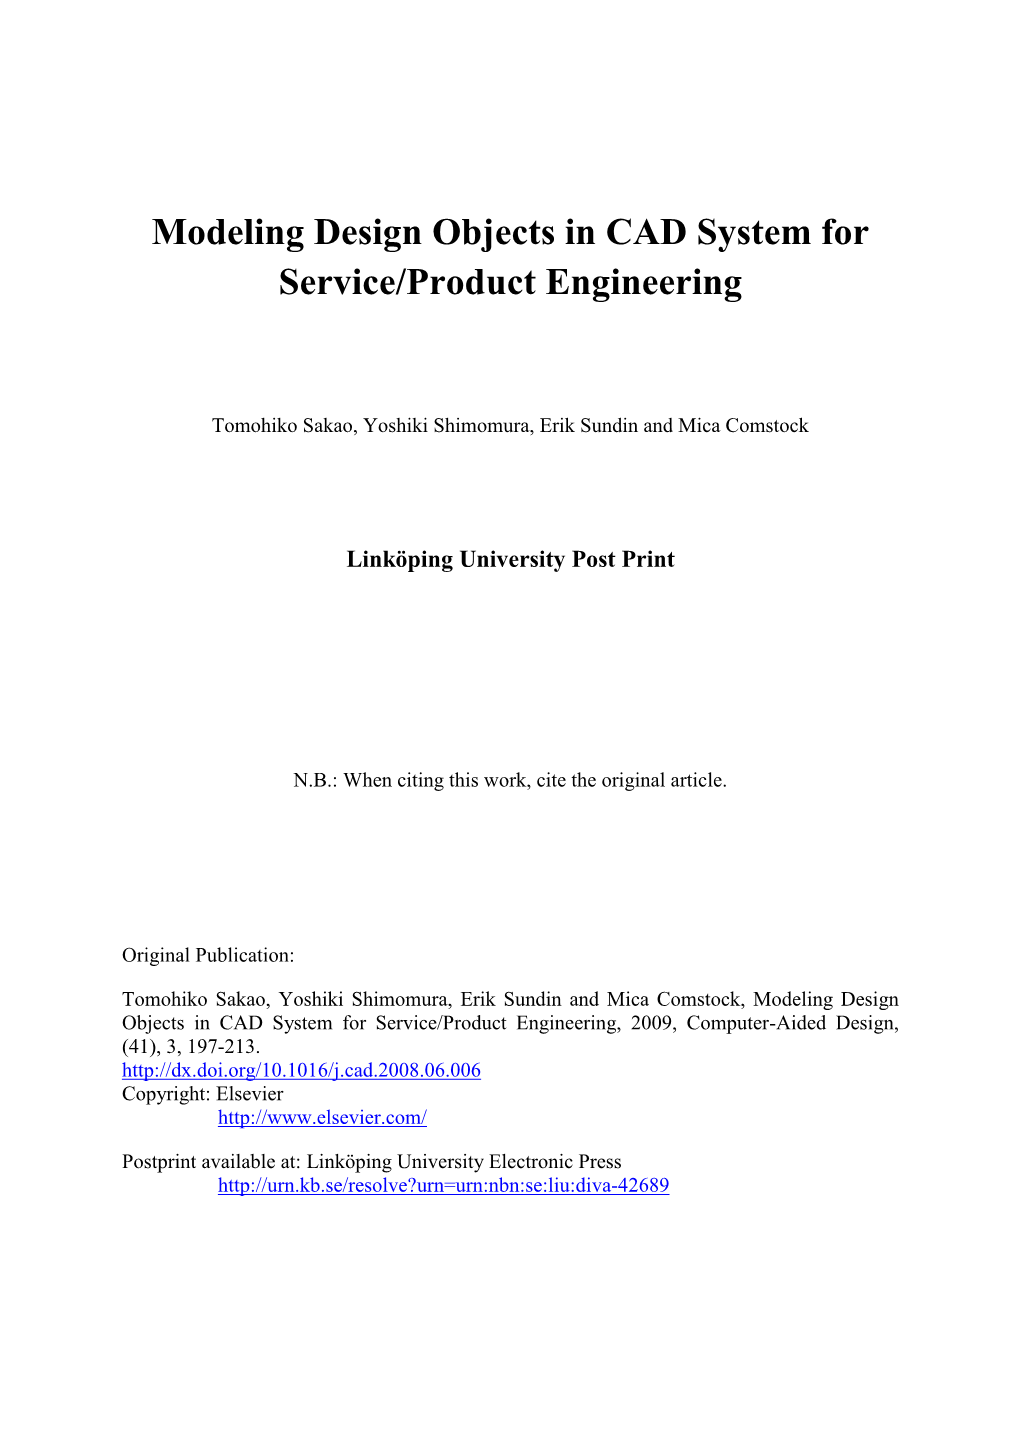 Modeling Design Objects in CAD System for Service/Product Engineering